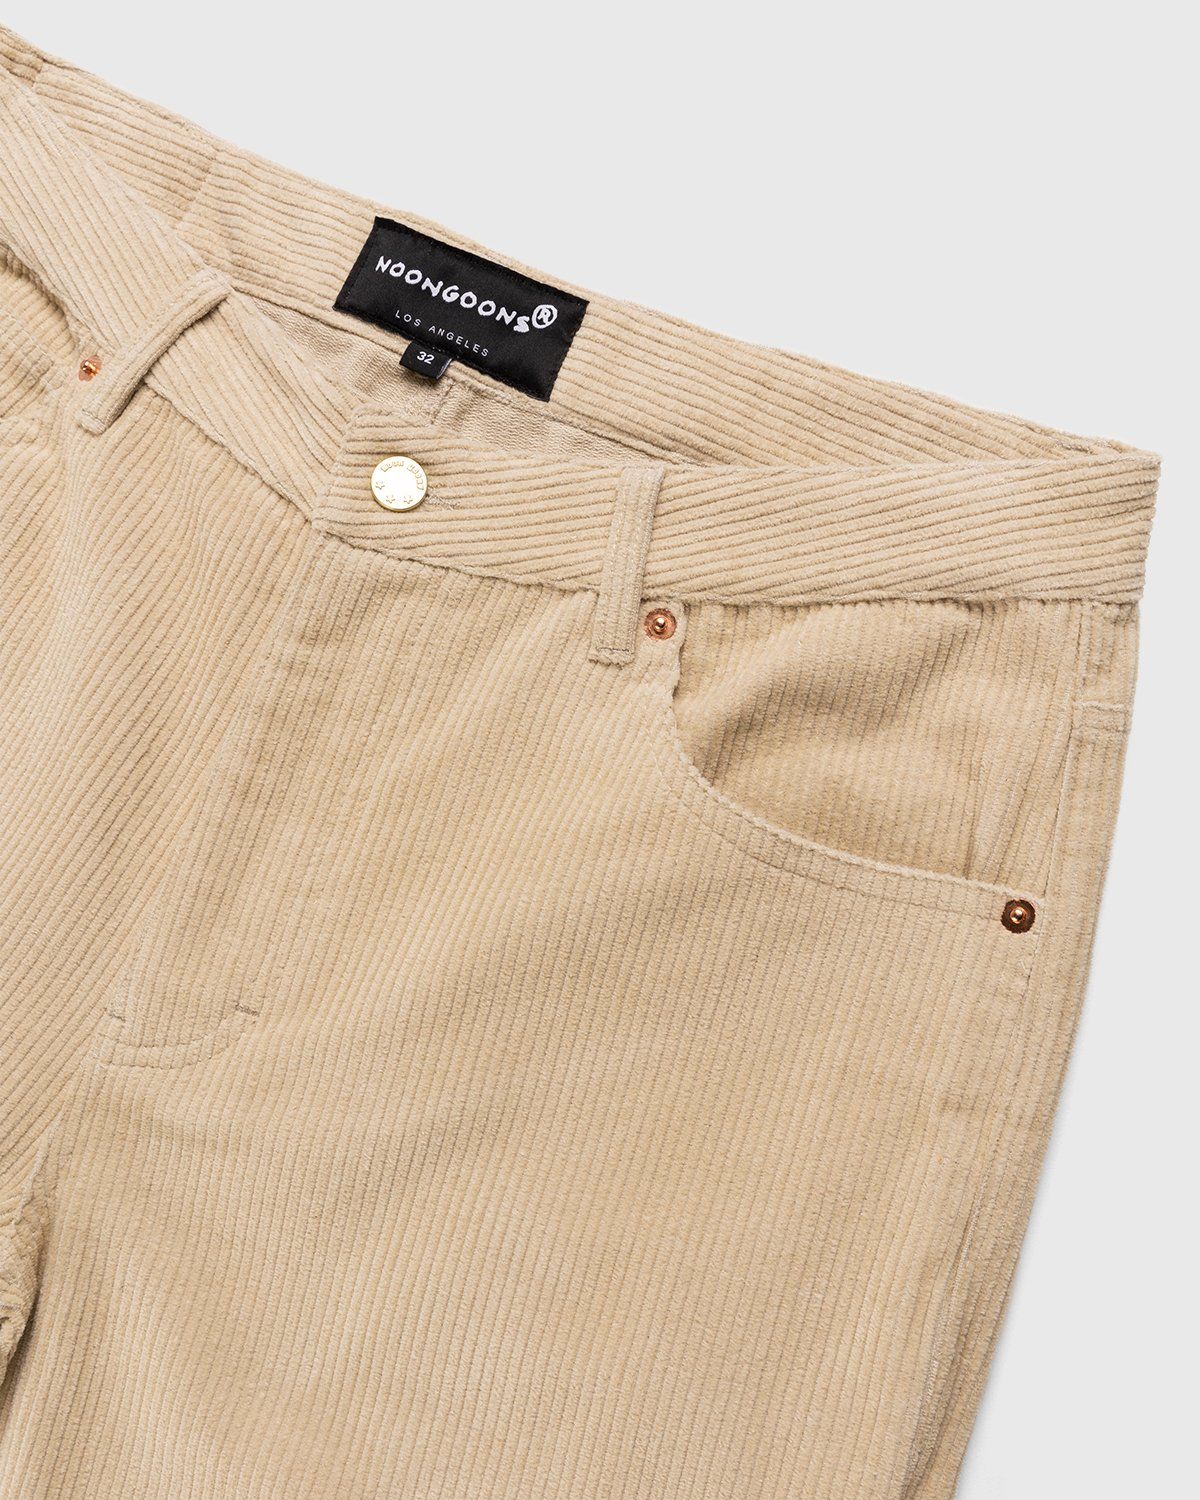 Noon Goons – Sublime Cord Short Overcast - Bermuda Cuts - Beige - Image 3